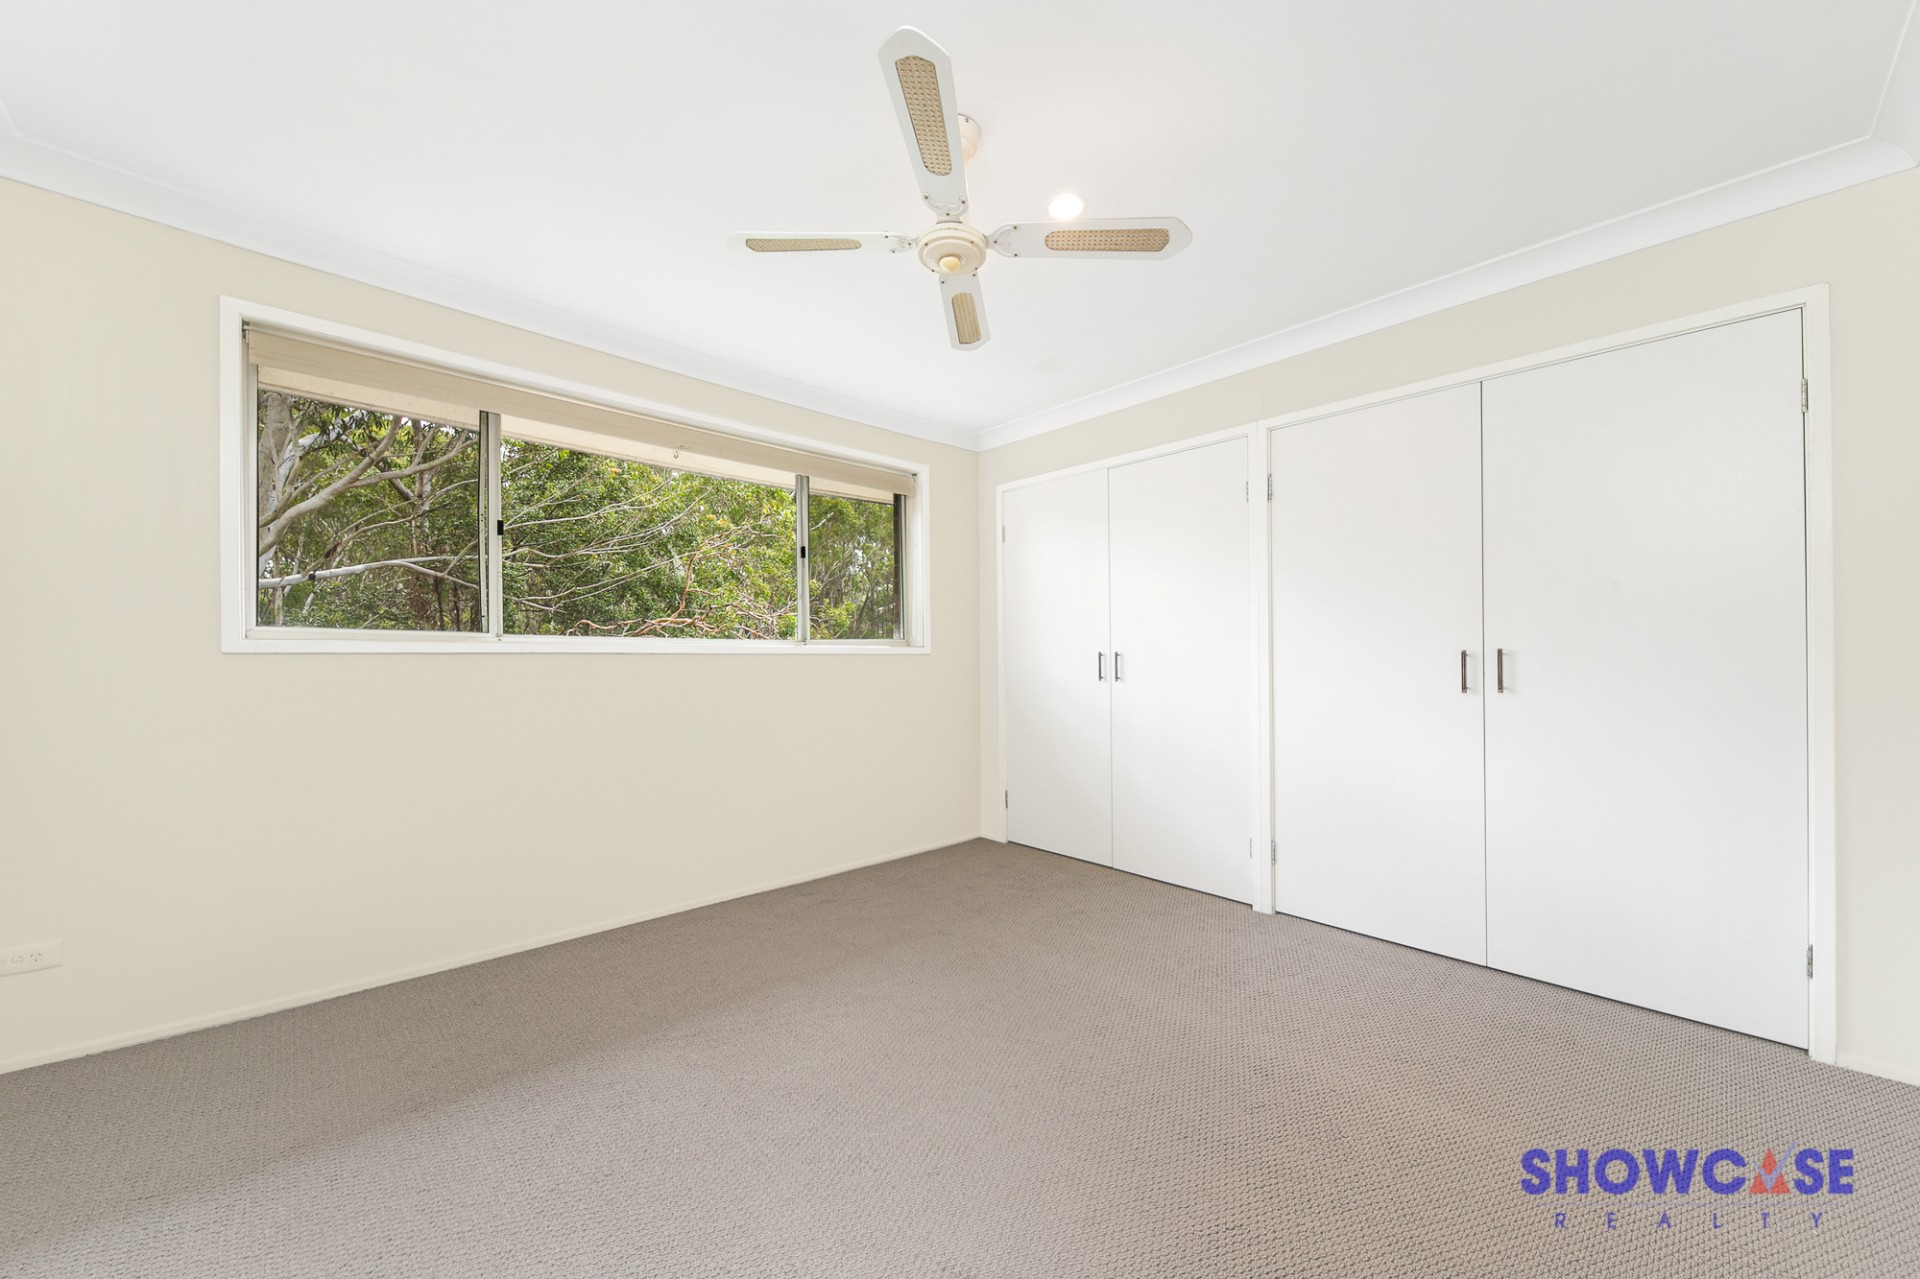 Selling your property in Telopea